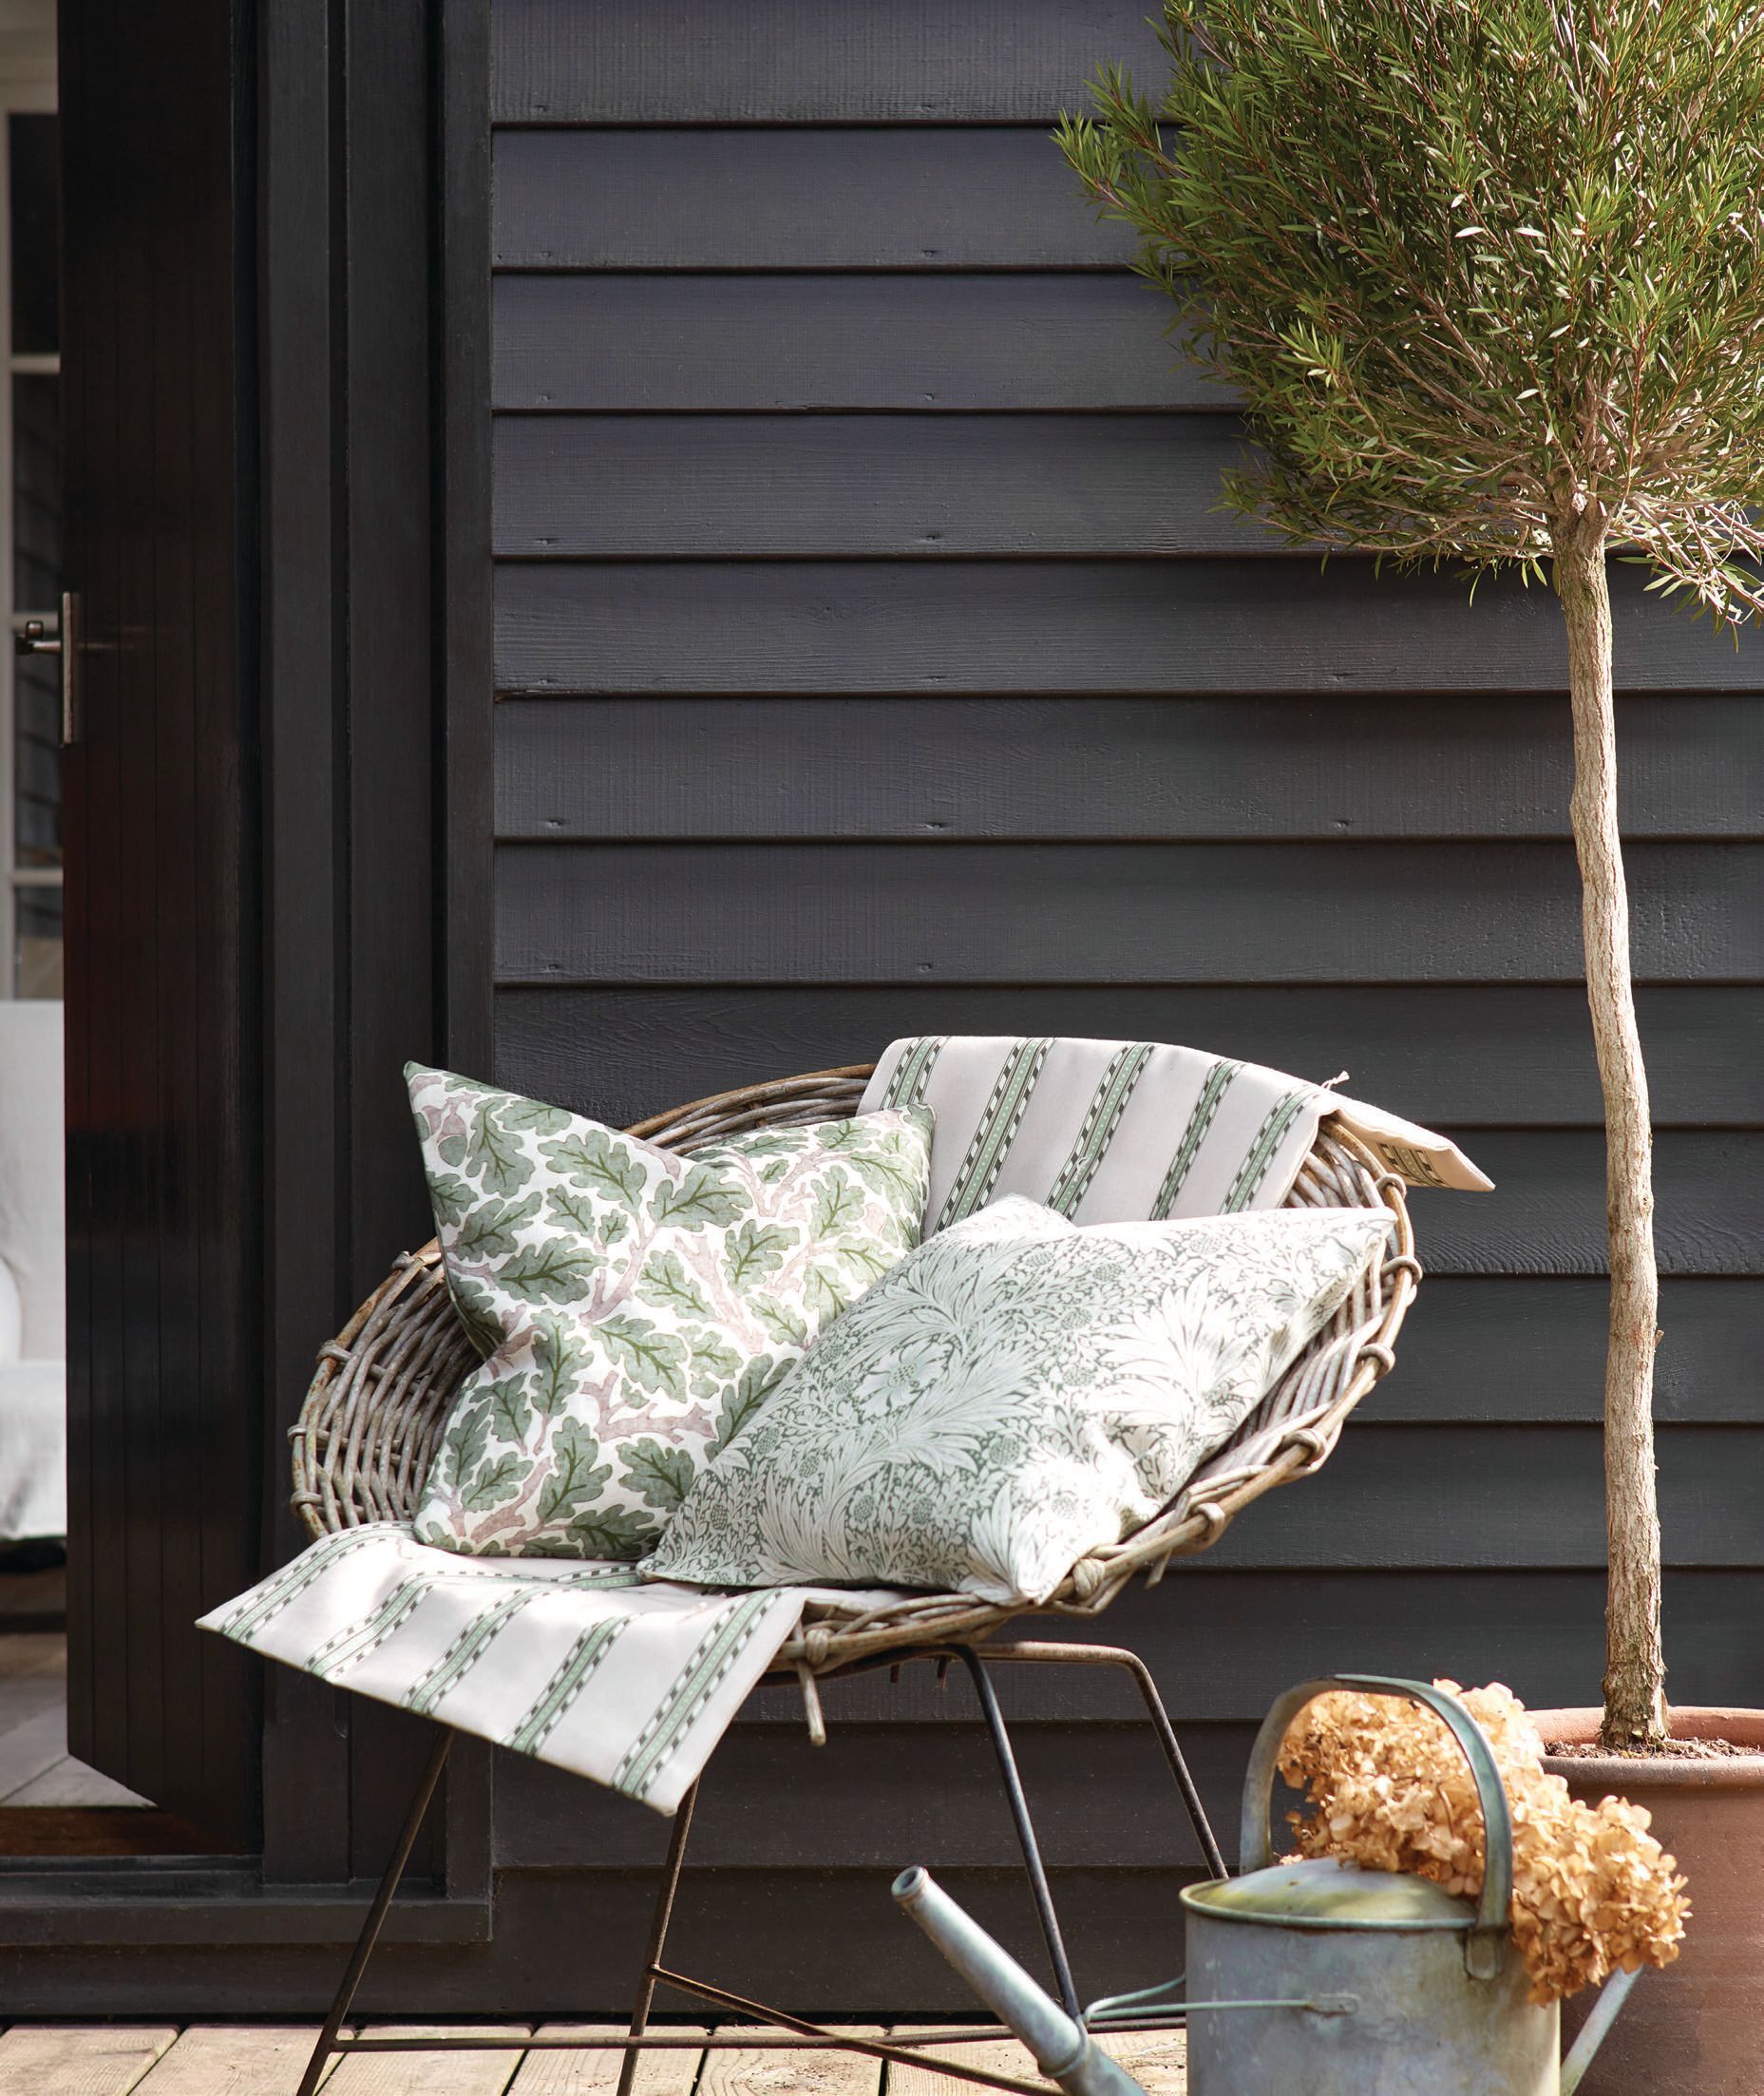 Pillows in Morris & Co. outdoor/performance collection fabrics Oak in sage green and Marigold in Mineral Blue atop a throw in Holland Park Stripe in sage and linen PHOTO COURTESY OF SANDERSON DESIGN GROUP